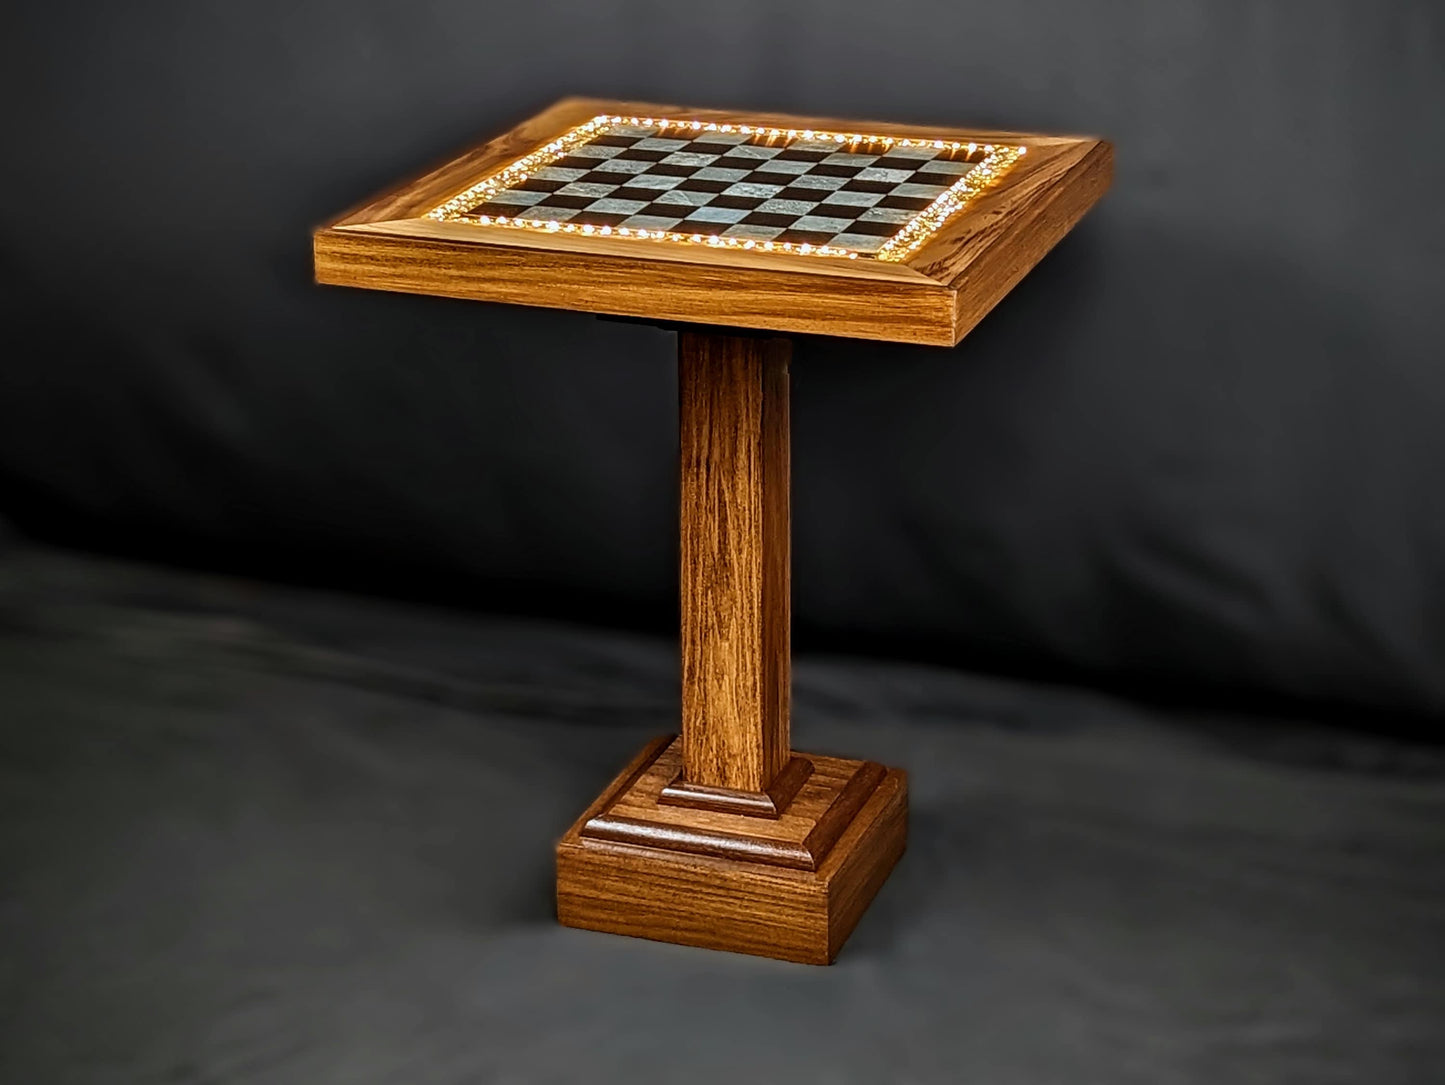 The Rook (Walnut) Chess Table - Ceramic Tile LED Illuminated Resin Solid Wood Table, Handmade Artisan Chess Pedestal Game Table